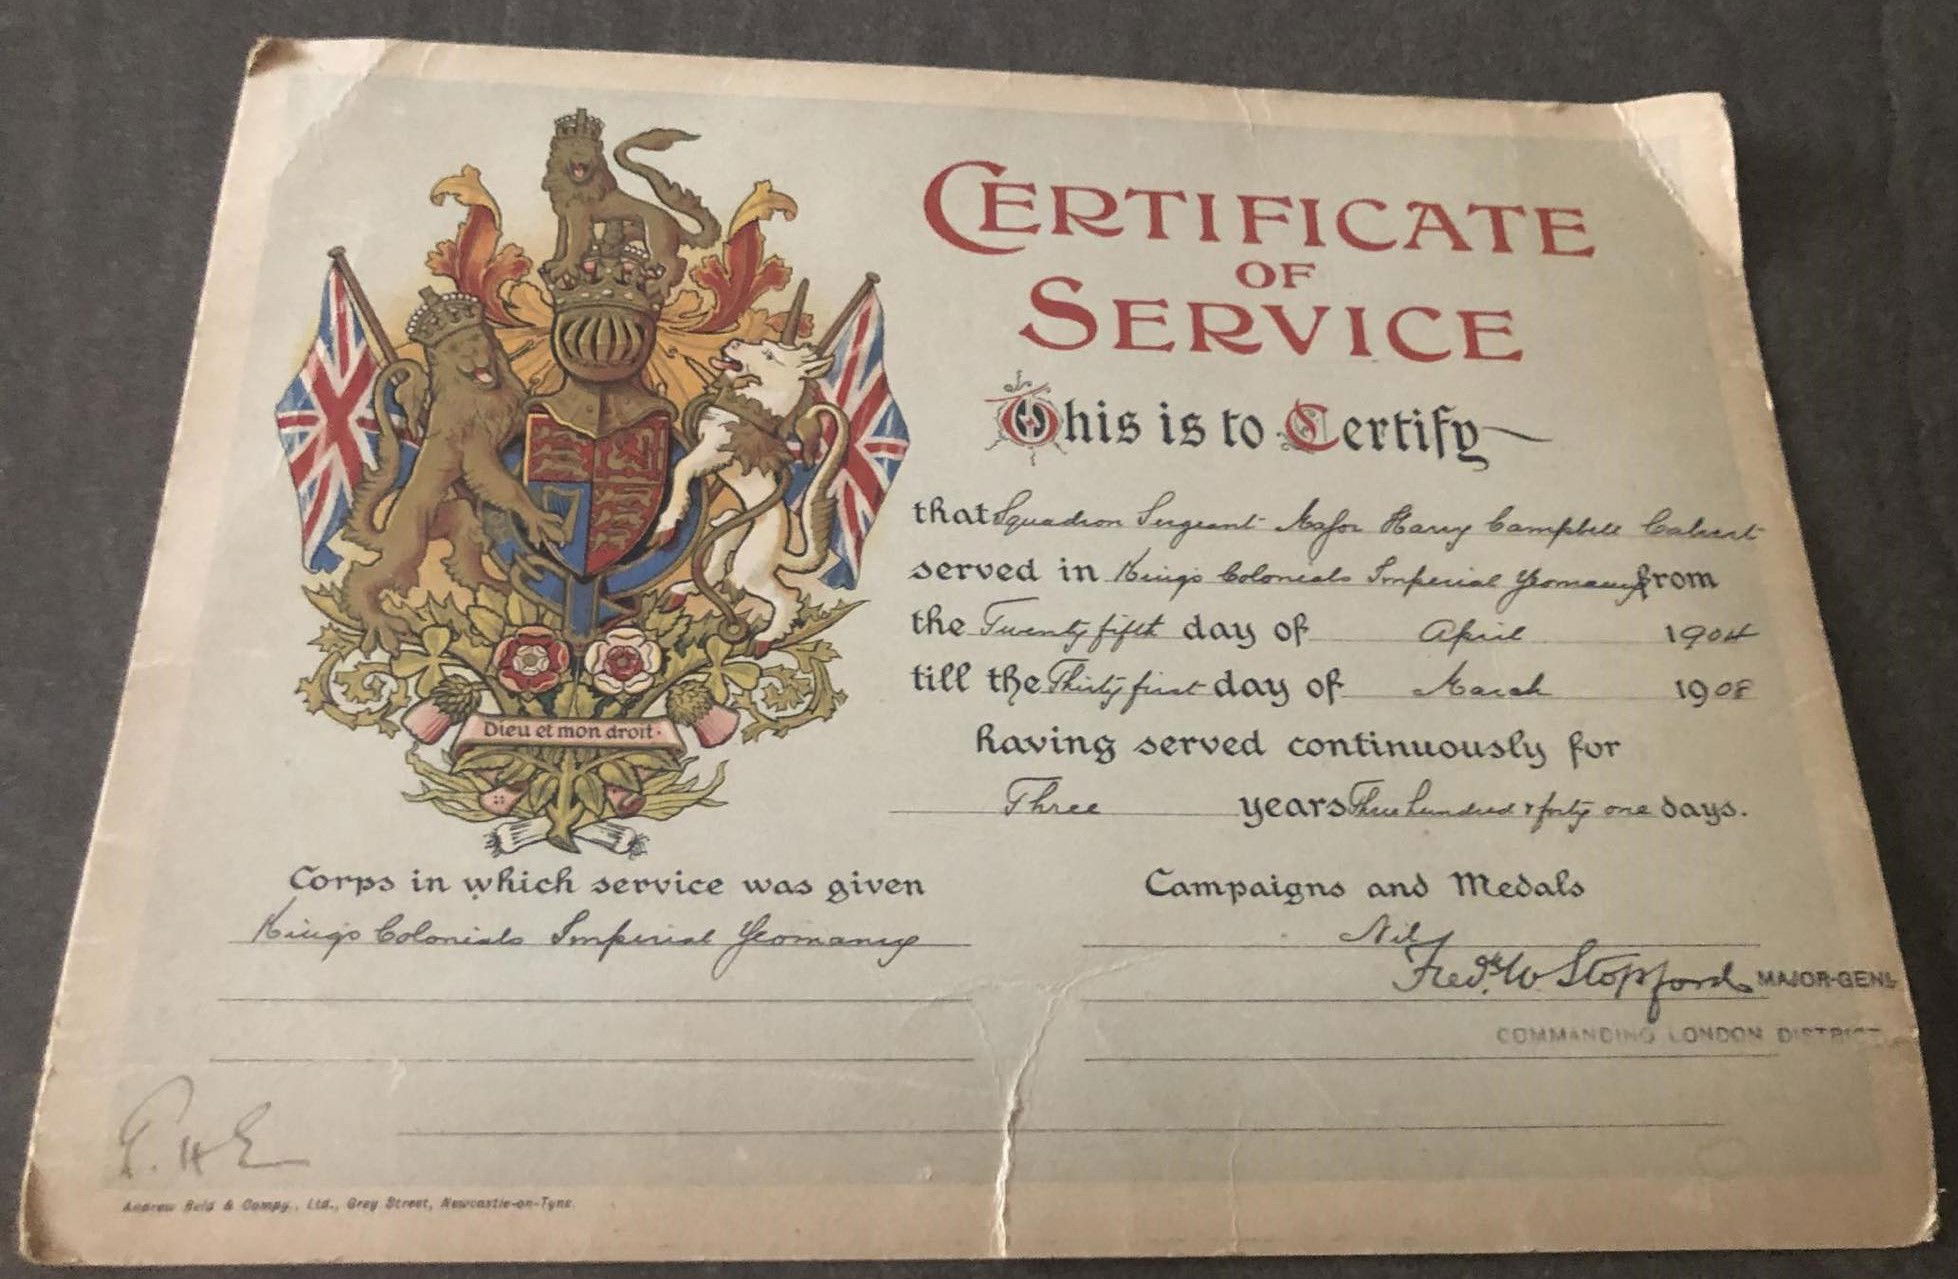 CALVERT, Harry Campbell. Squadron Serjeant Major KC/KEH circa 1910-13. Certificate of Service with the King's Colonials.